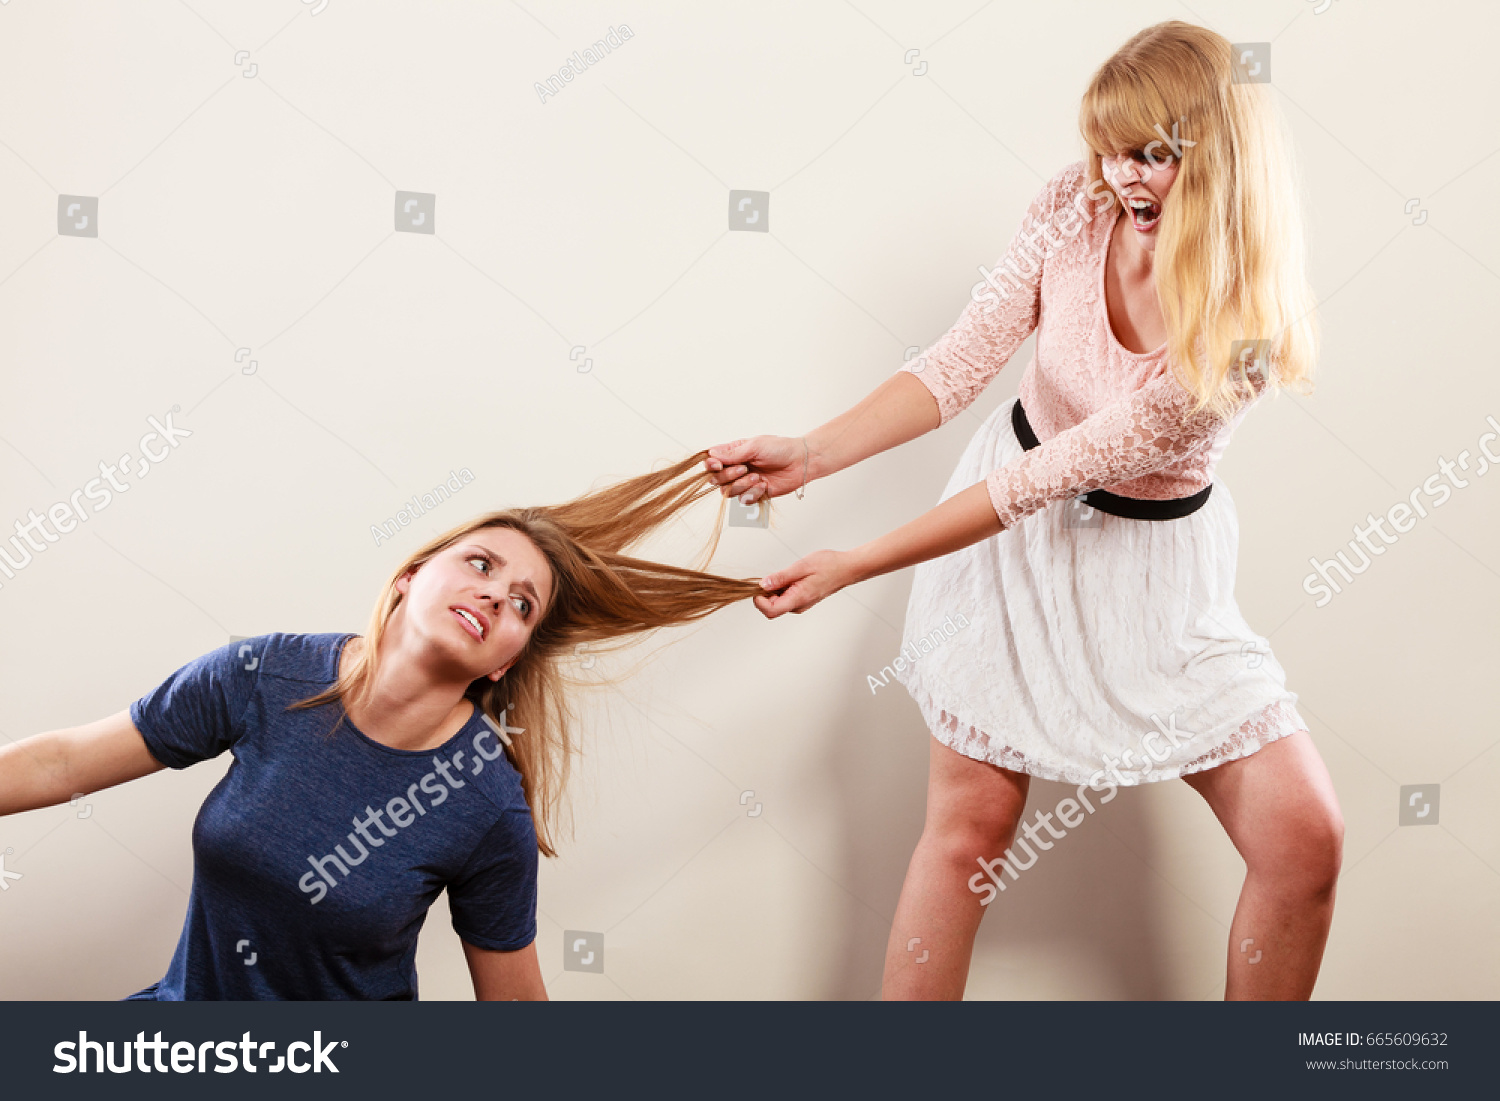 stock-photo-aggressive-mad-women-fighting-each-other-pulling-hair-two-young-girls-struggling-win-catfight-665609632.jpg